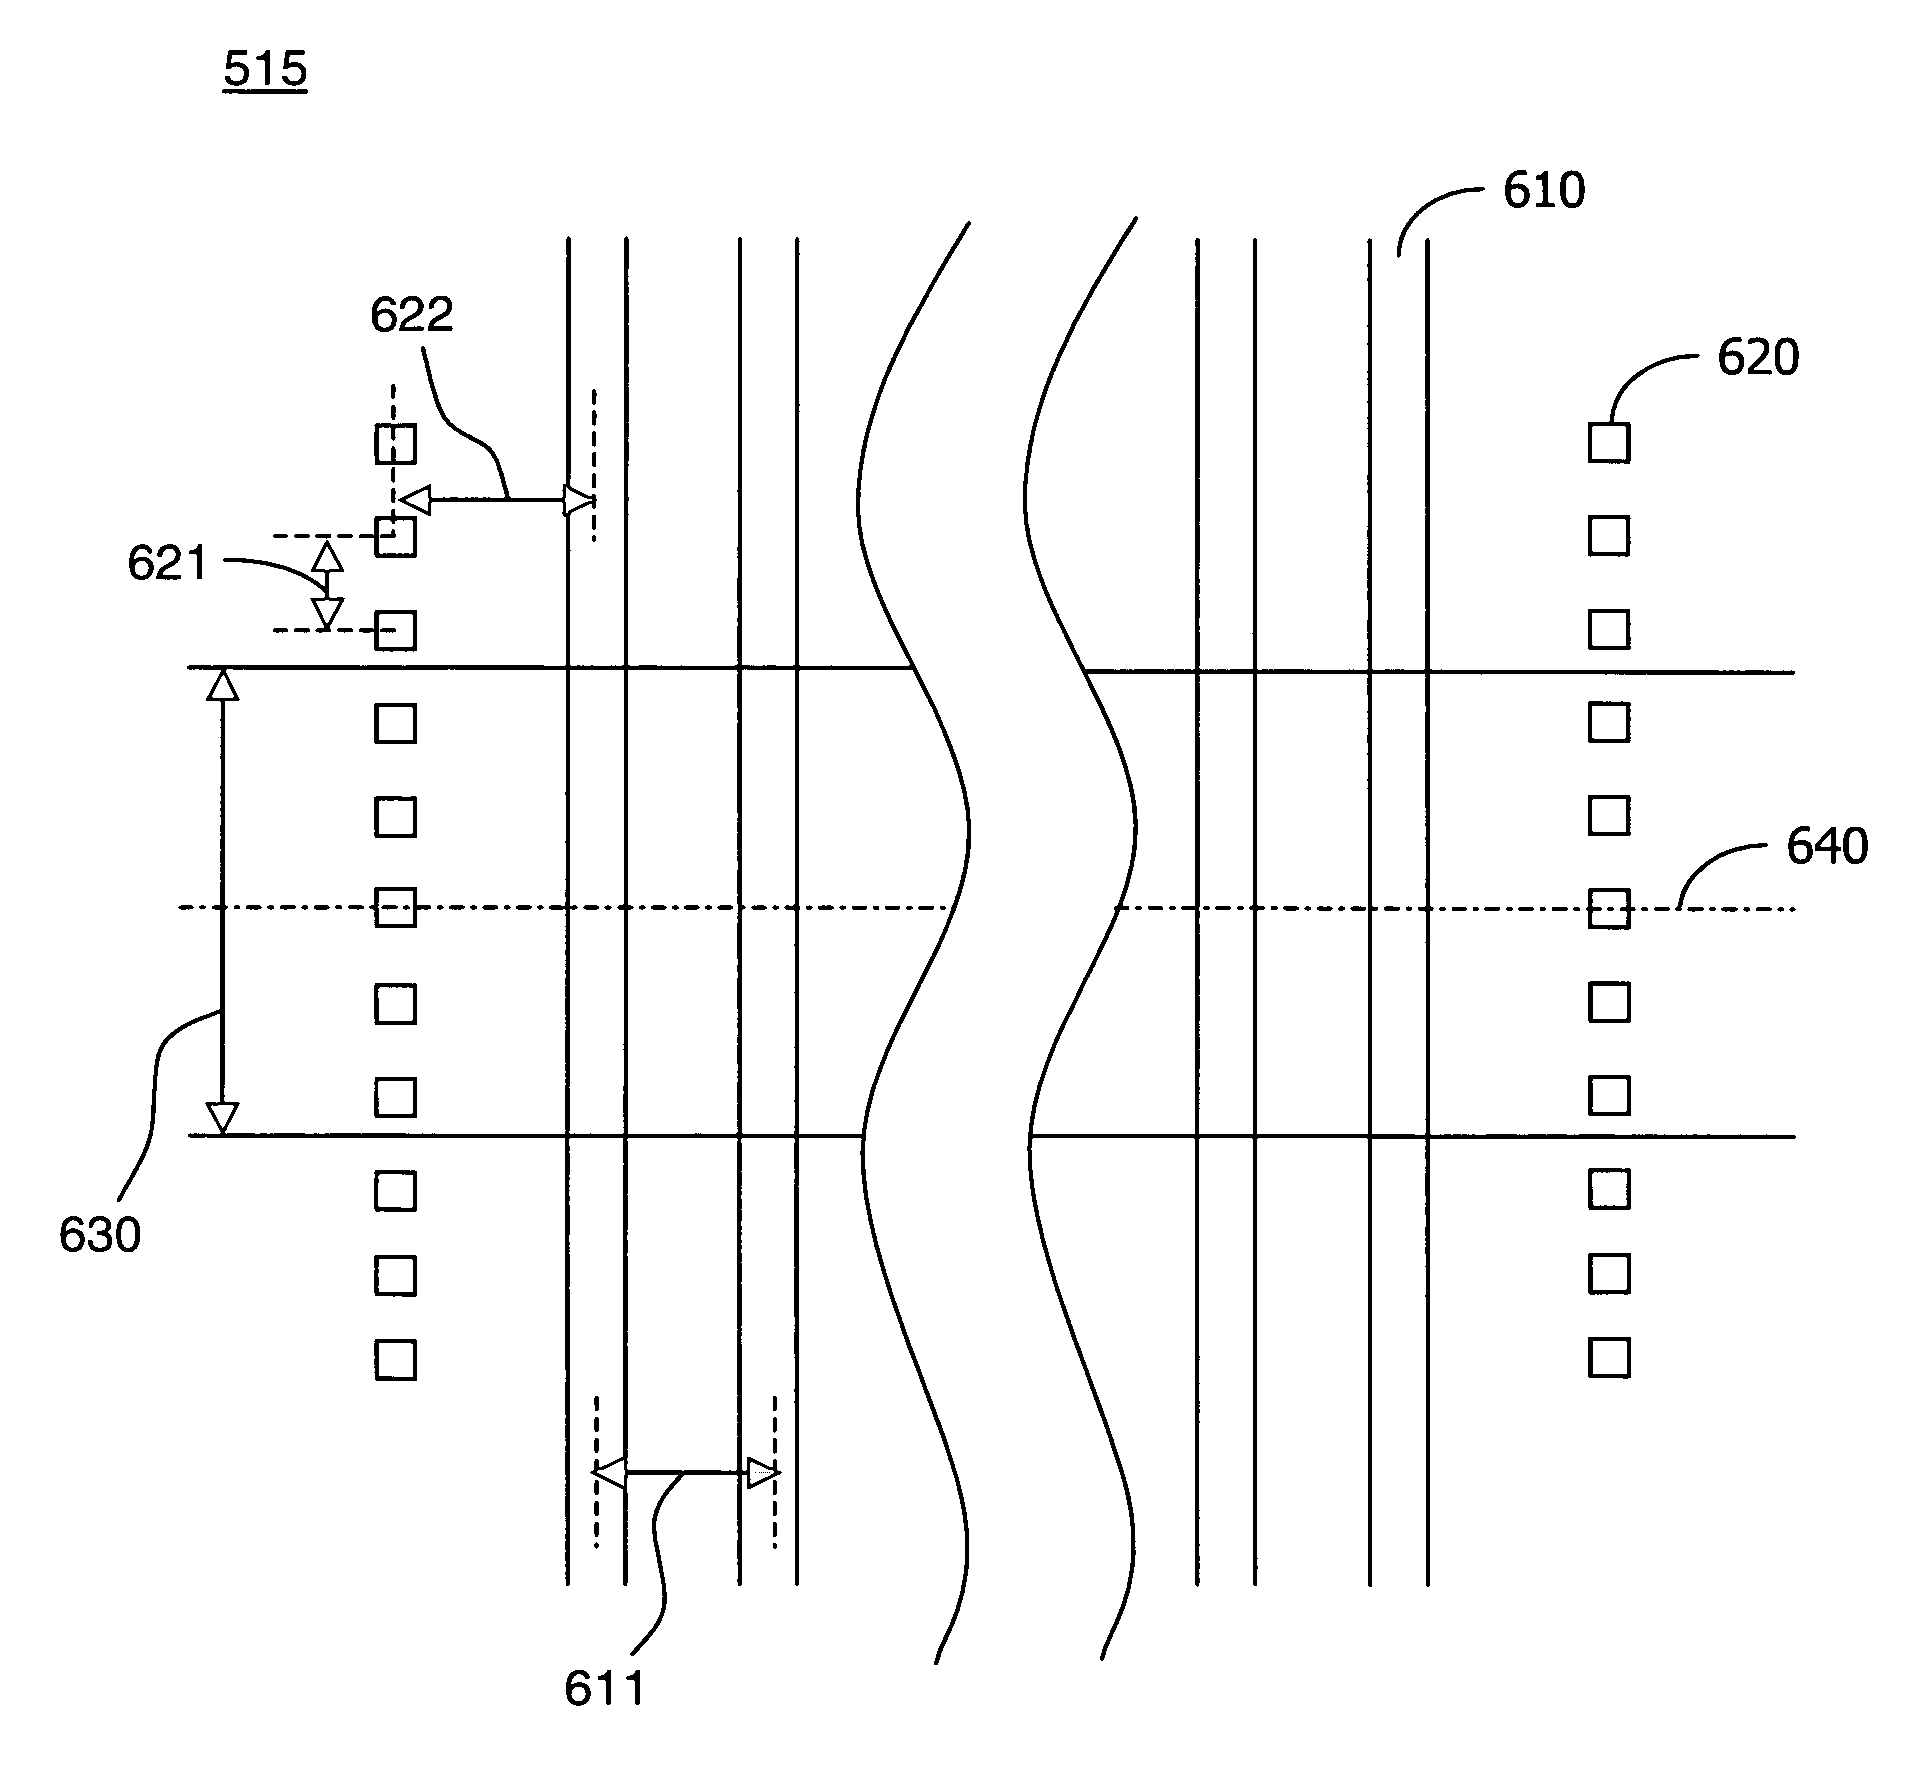 Compact optical detection system for a microfluidic device